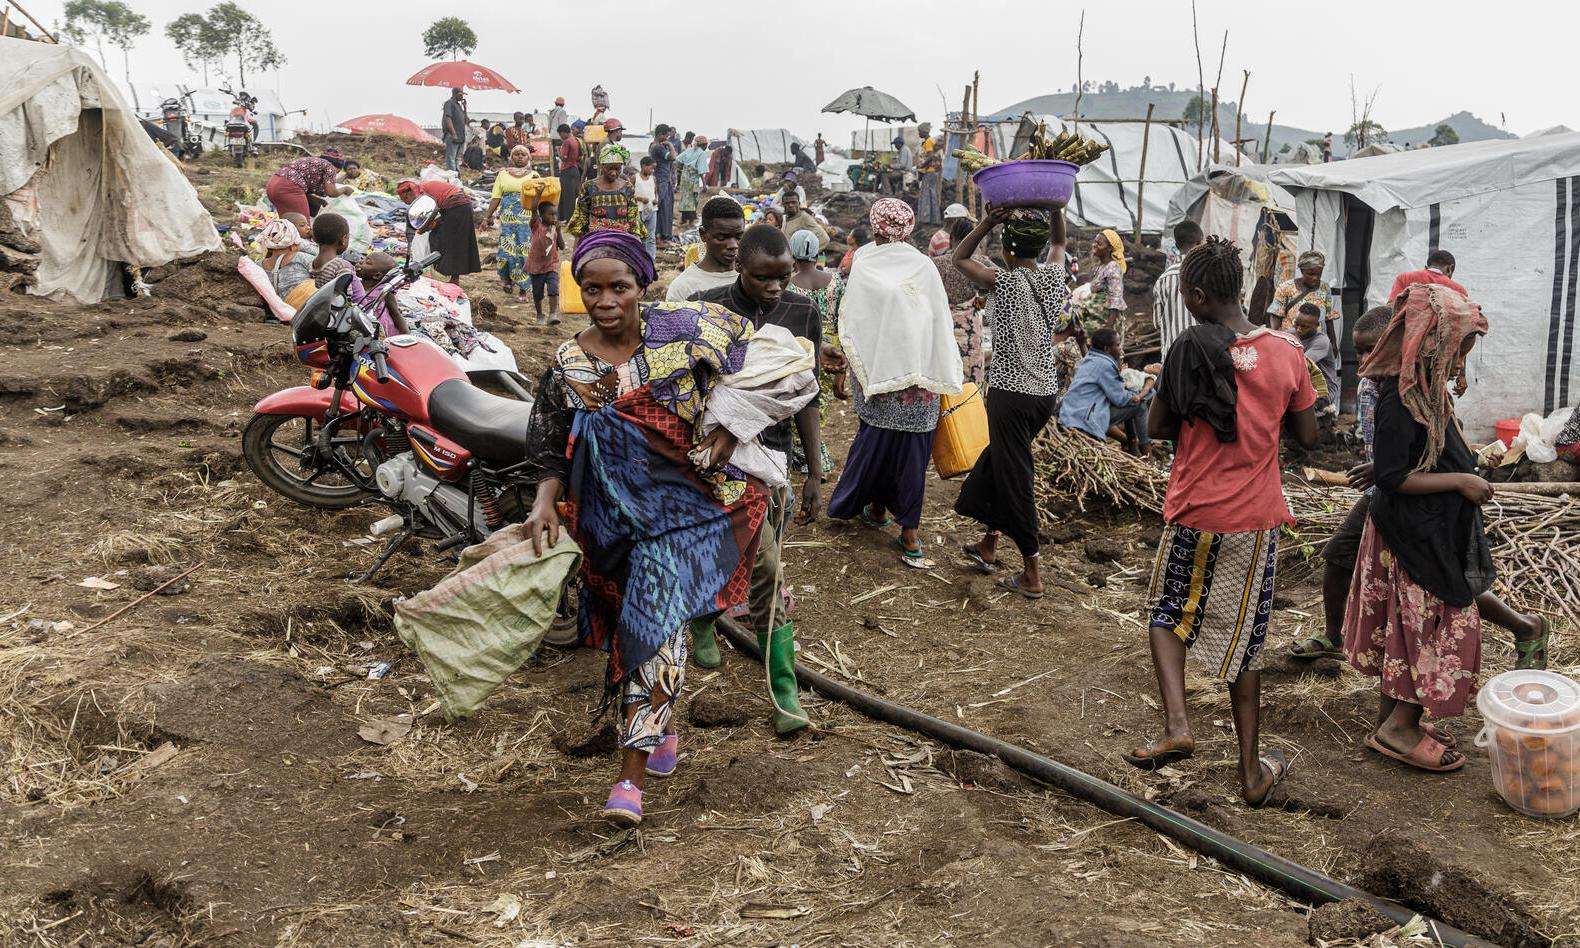 A crowd of displaced people at the Bulengo IDP camp near Goma, Democratic Republic of Congo.